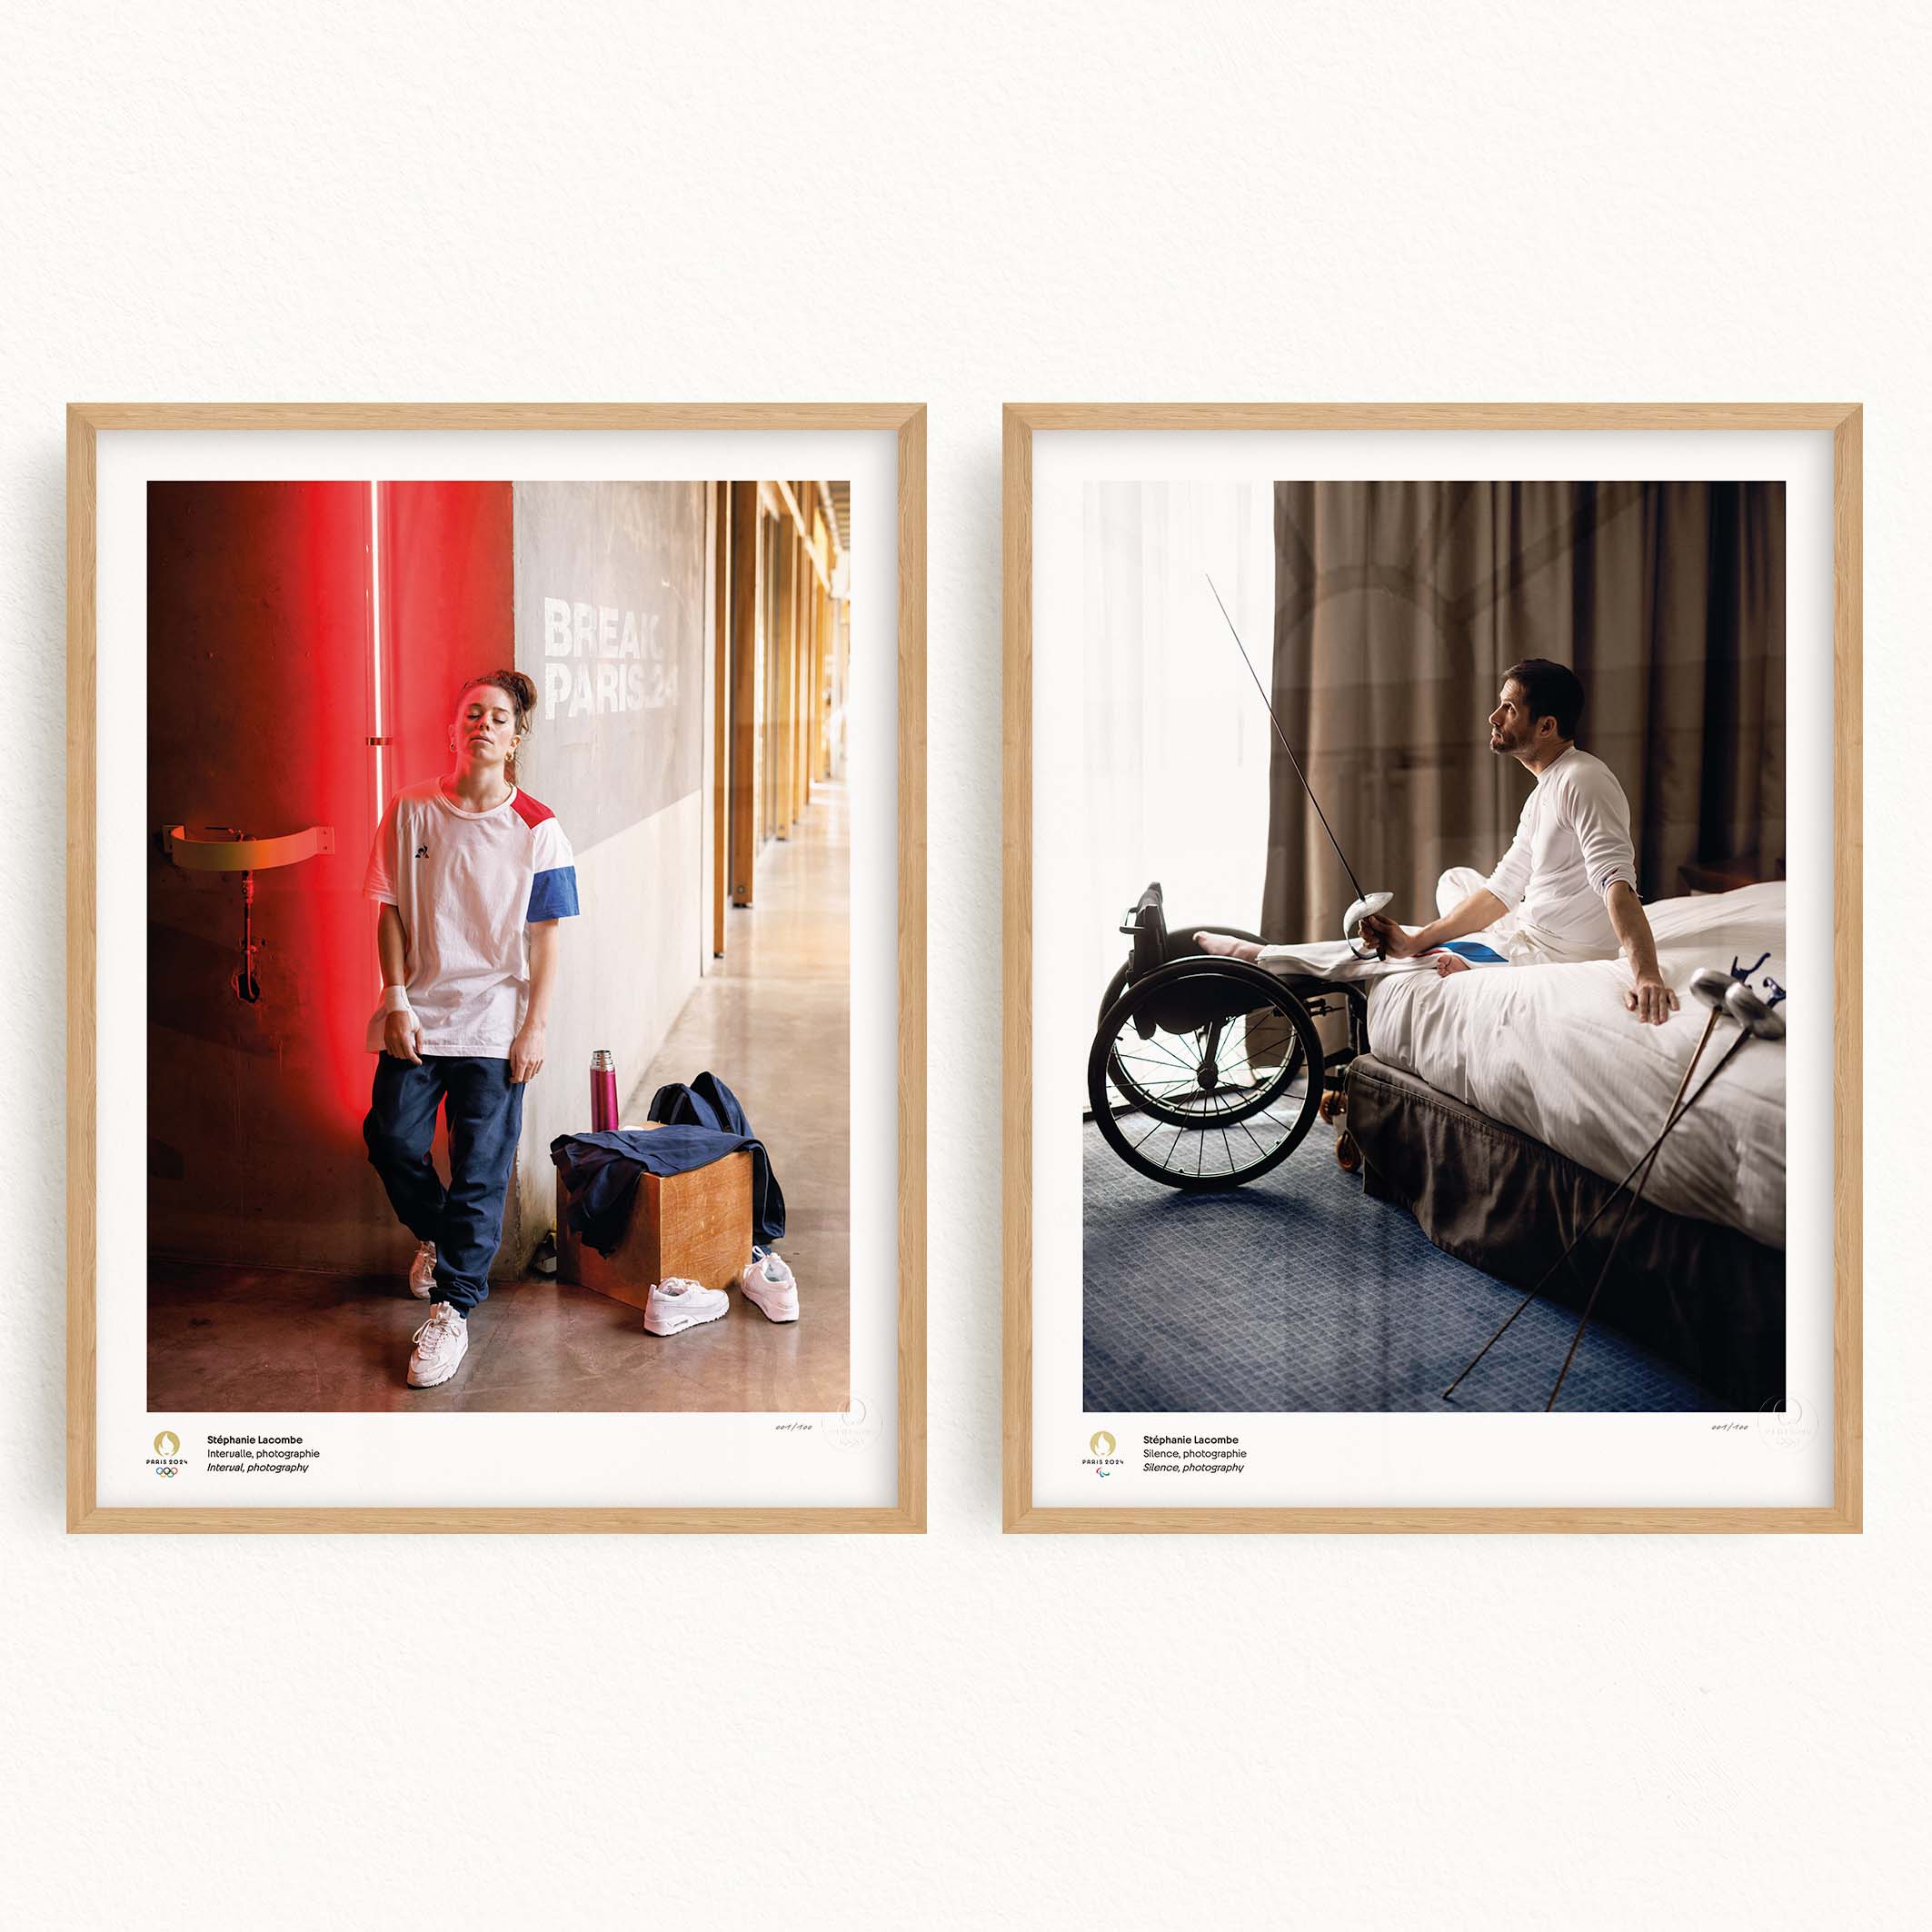 Diptych of artistic posters Paris 2024 for the Olympic and Paralympic games by Stéphanie Lacombe